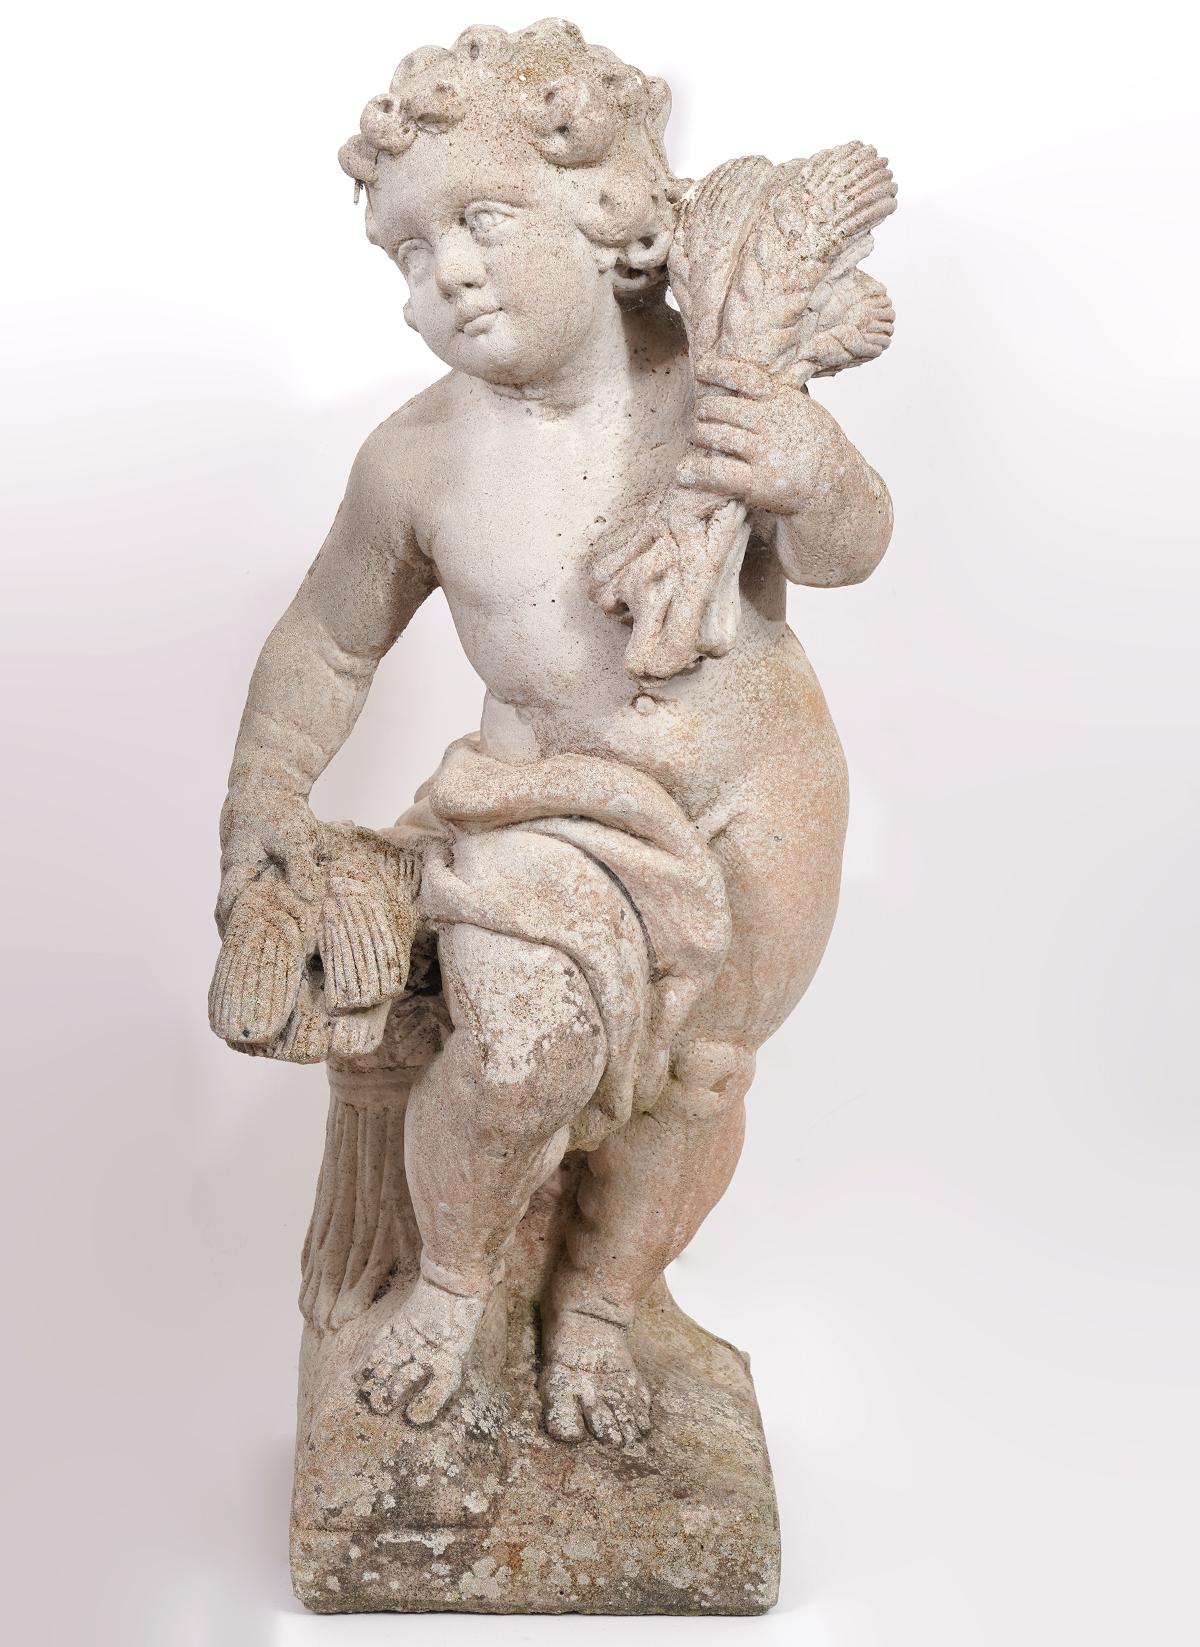 This classical group of likely French putti statues representing The Four Seasons are made of cast sand stone (you can see the small grains of quartz glittering) after 18th century originals. They have a beautiful patina with traces of weathering